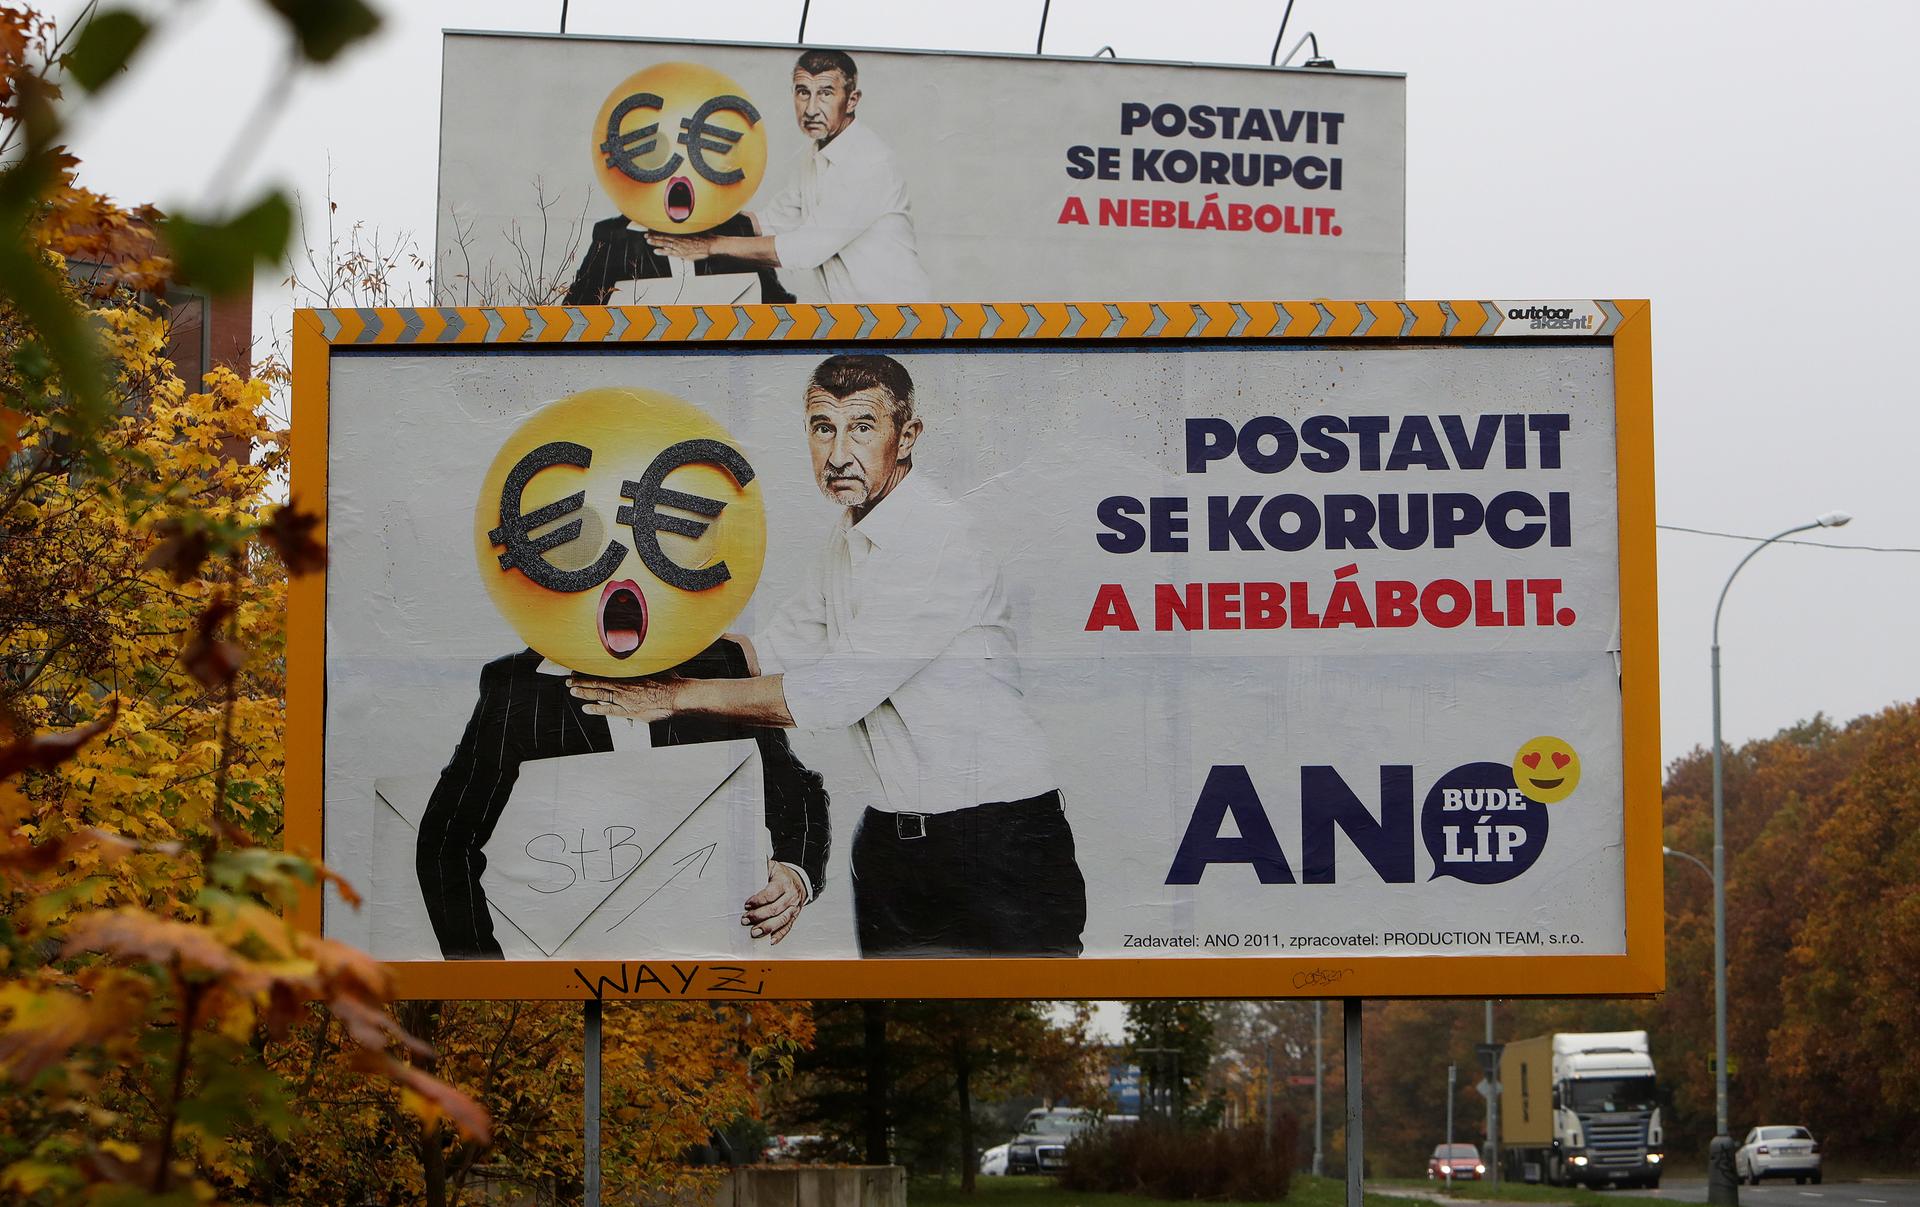 Election campaign posters for the leader billionaire politician Andrej Babis in Prague, Czech Republic, reading: "Stand up against corruption and stop babbling."